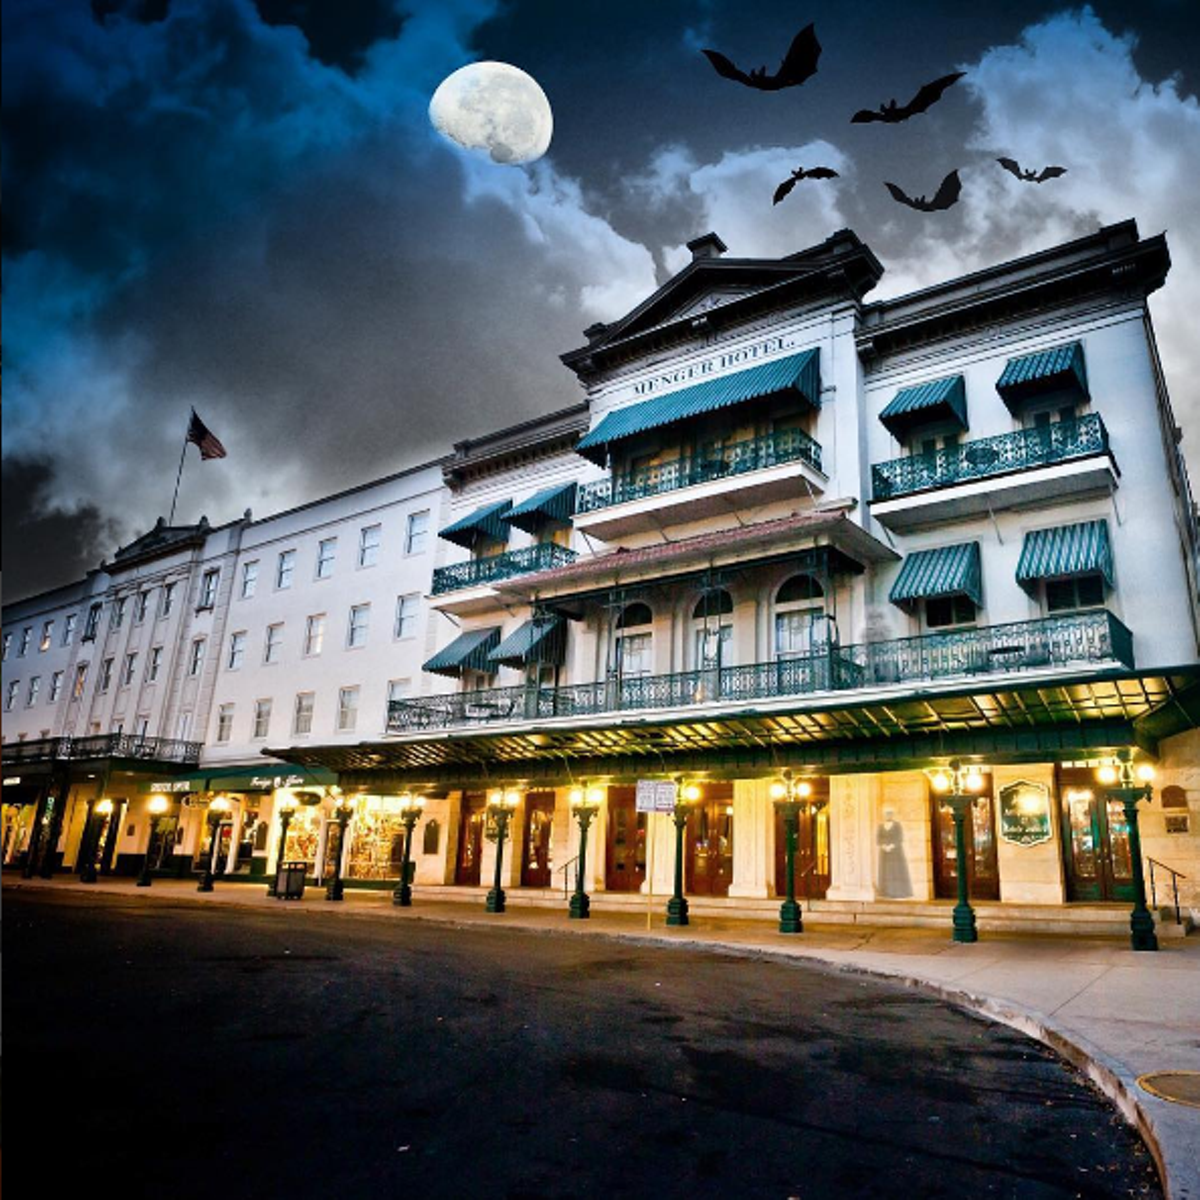 14 Haunted Houses And Ghost Tours To Visit This Halloween Season Slideshows San Antonio Current